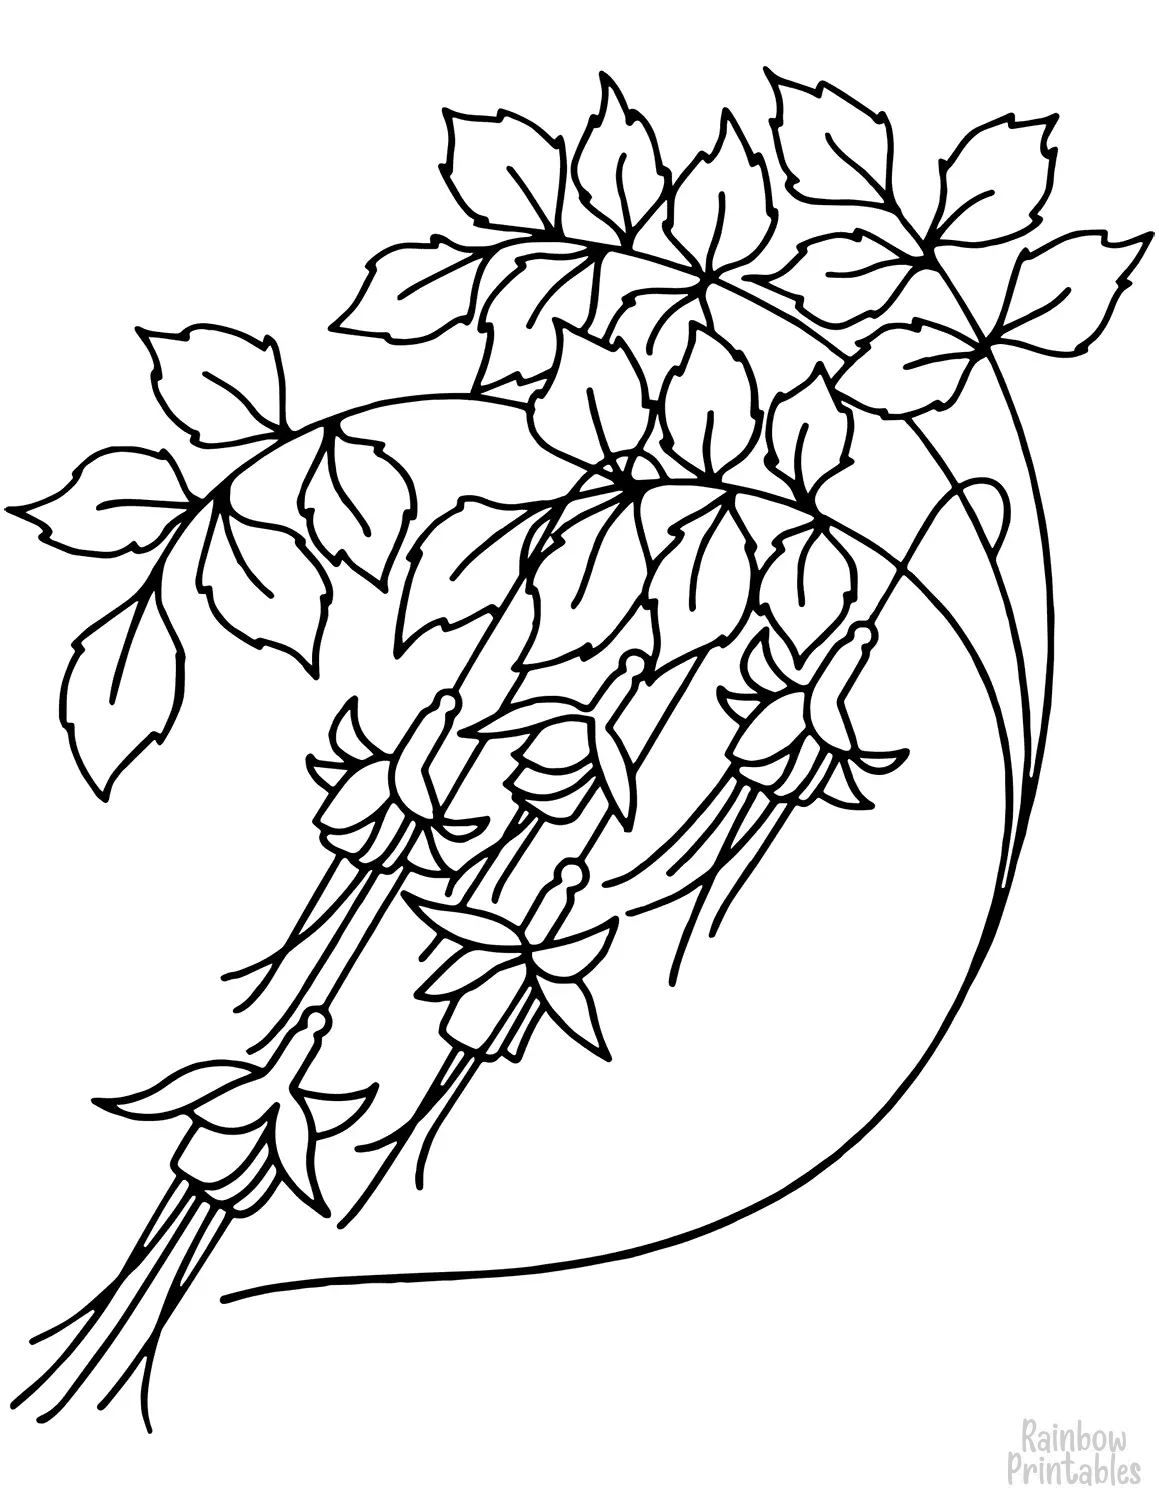 SIMPLE-EASY-line-drawings-BELLFLOWERS-coloring-page-for-kids Outline